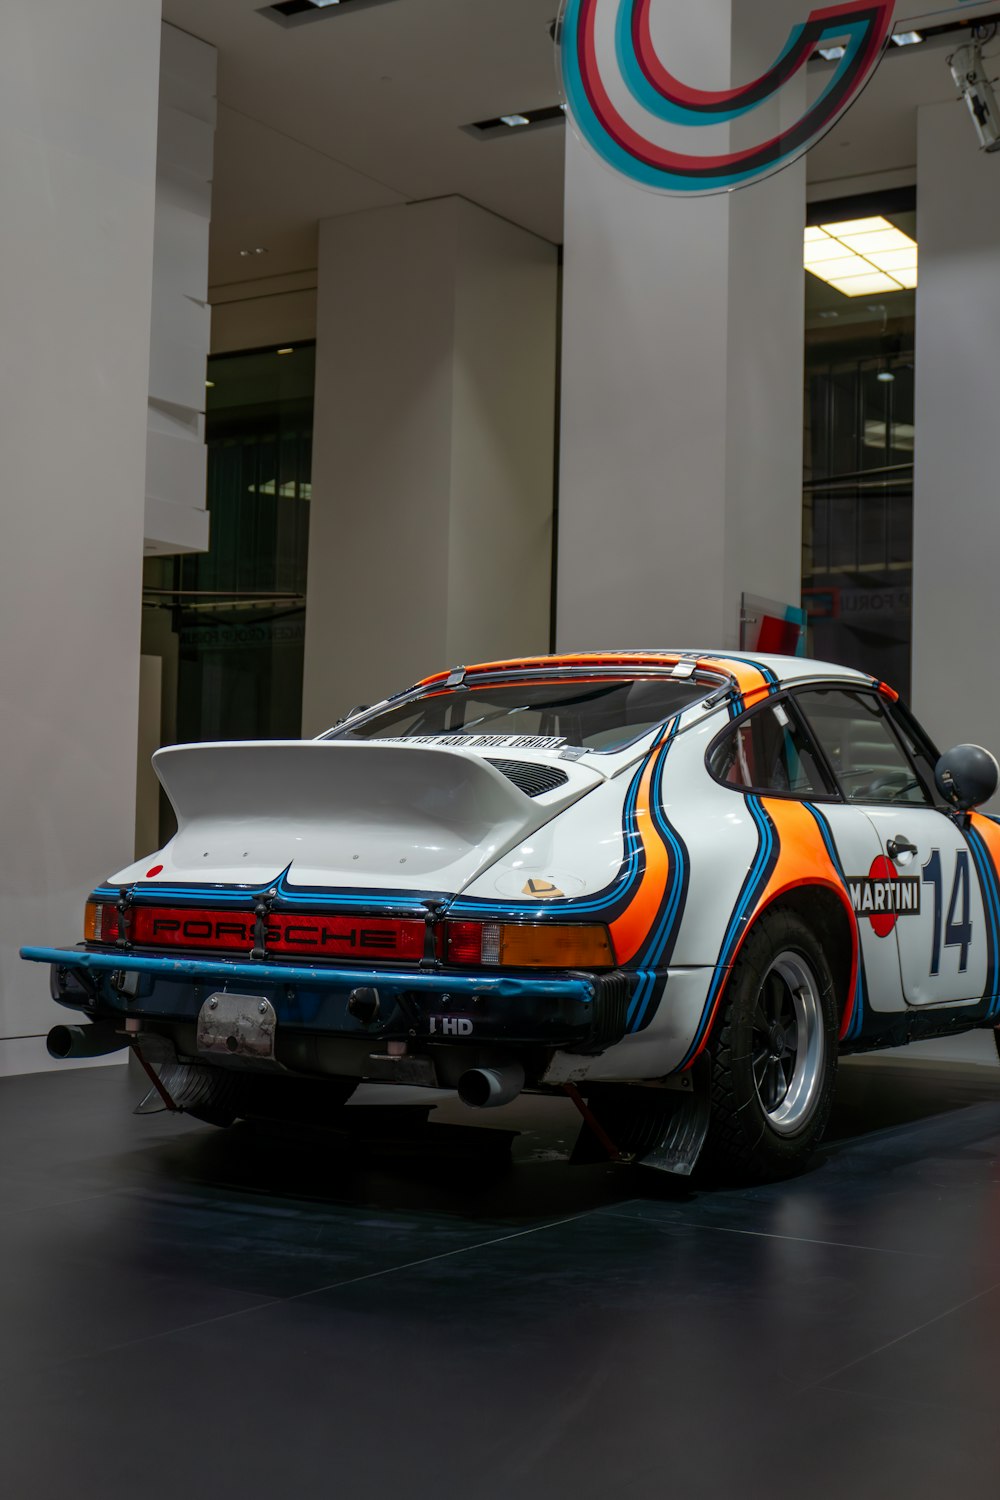 a white car with orange and blue stripes parked in a building